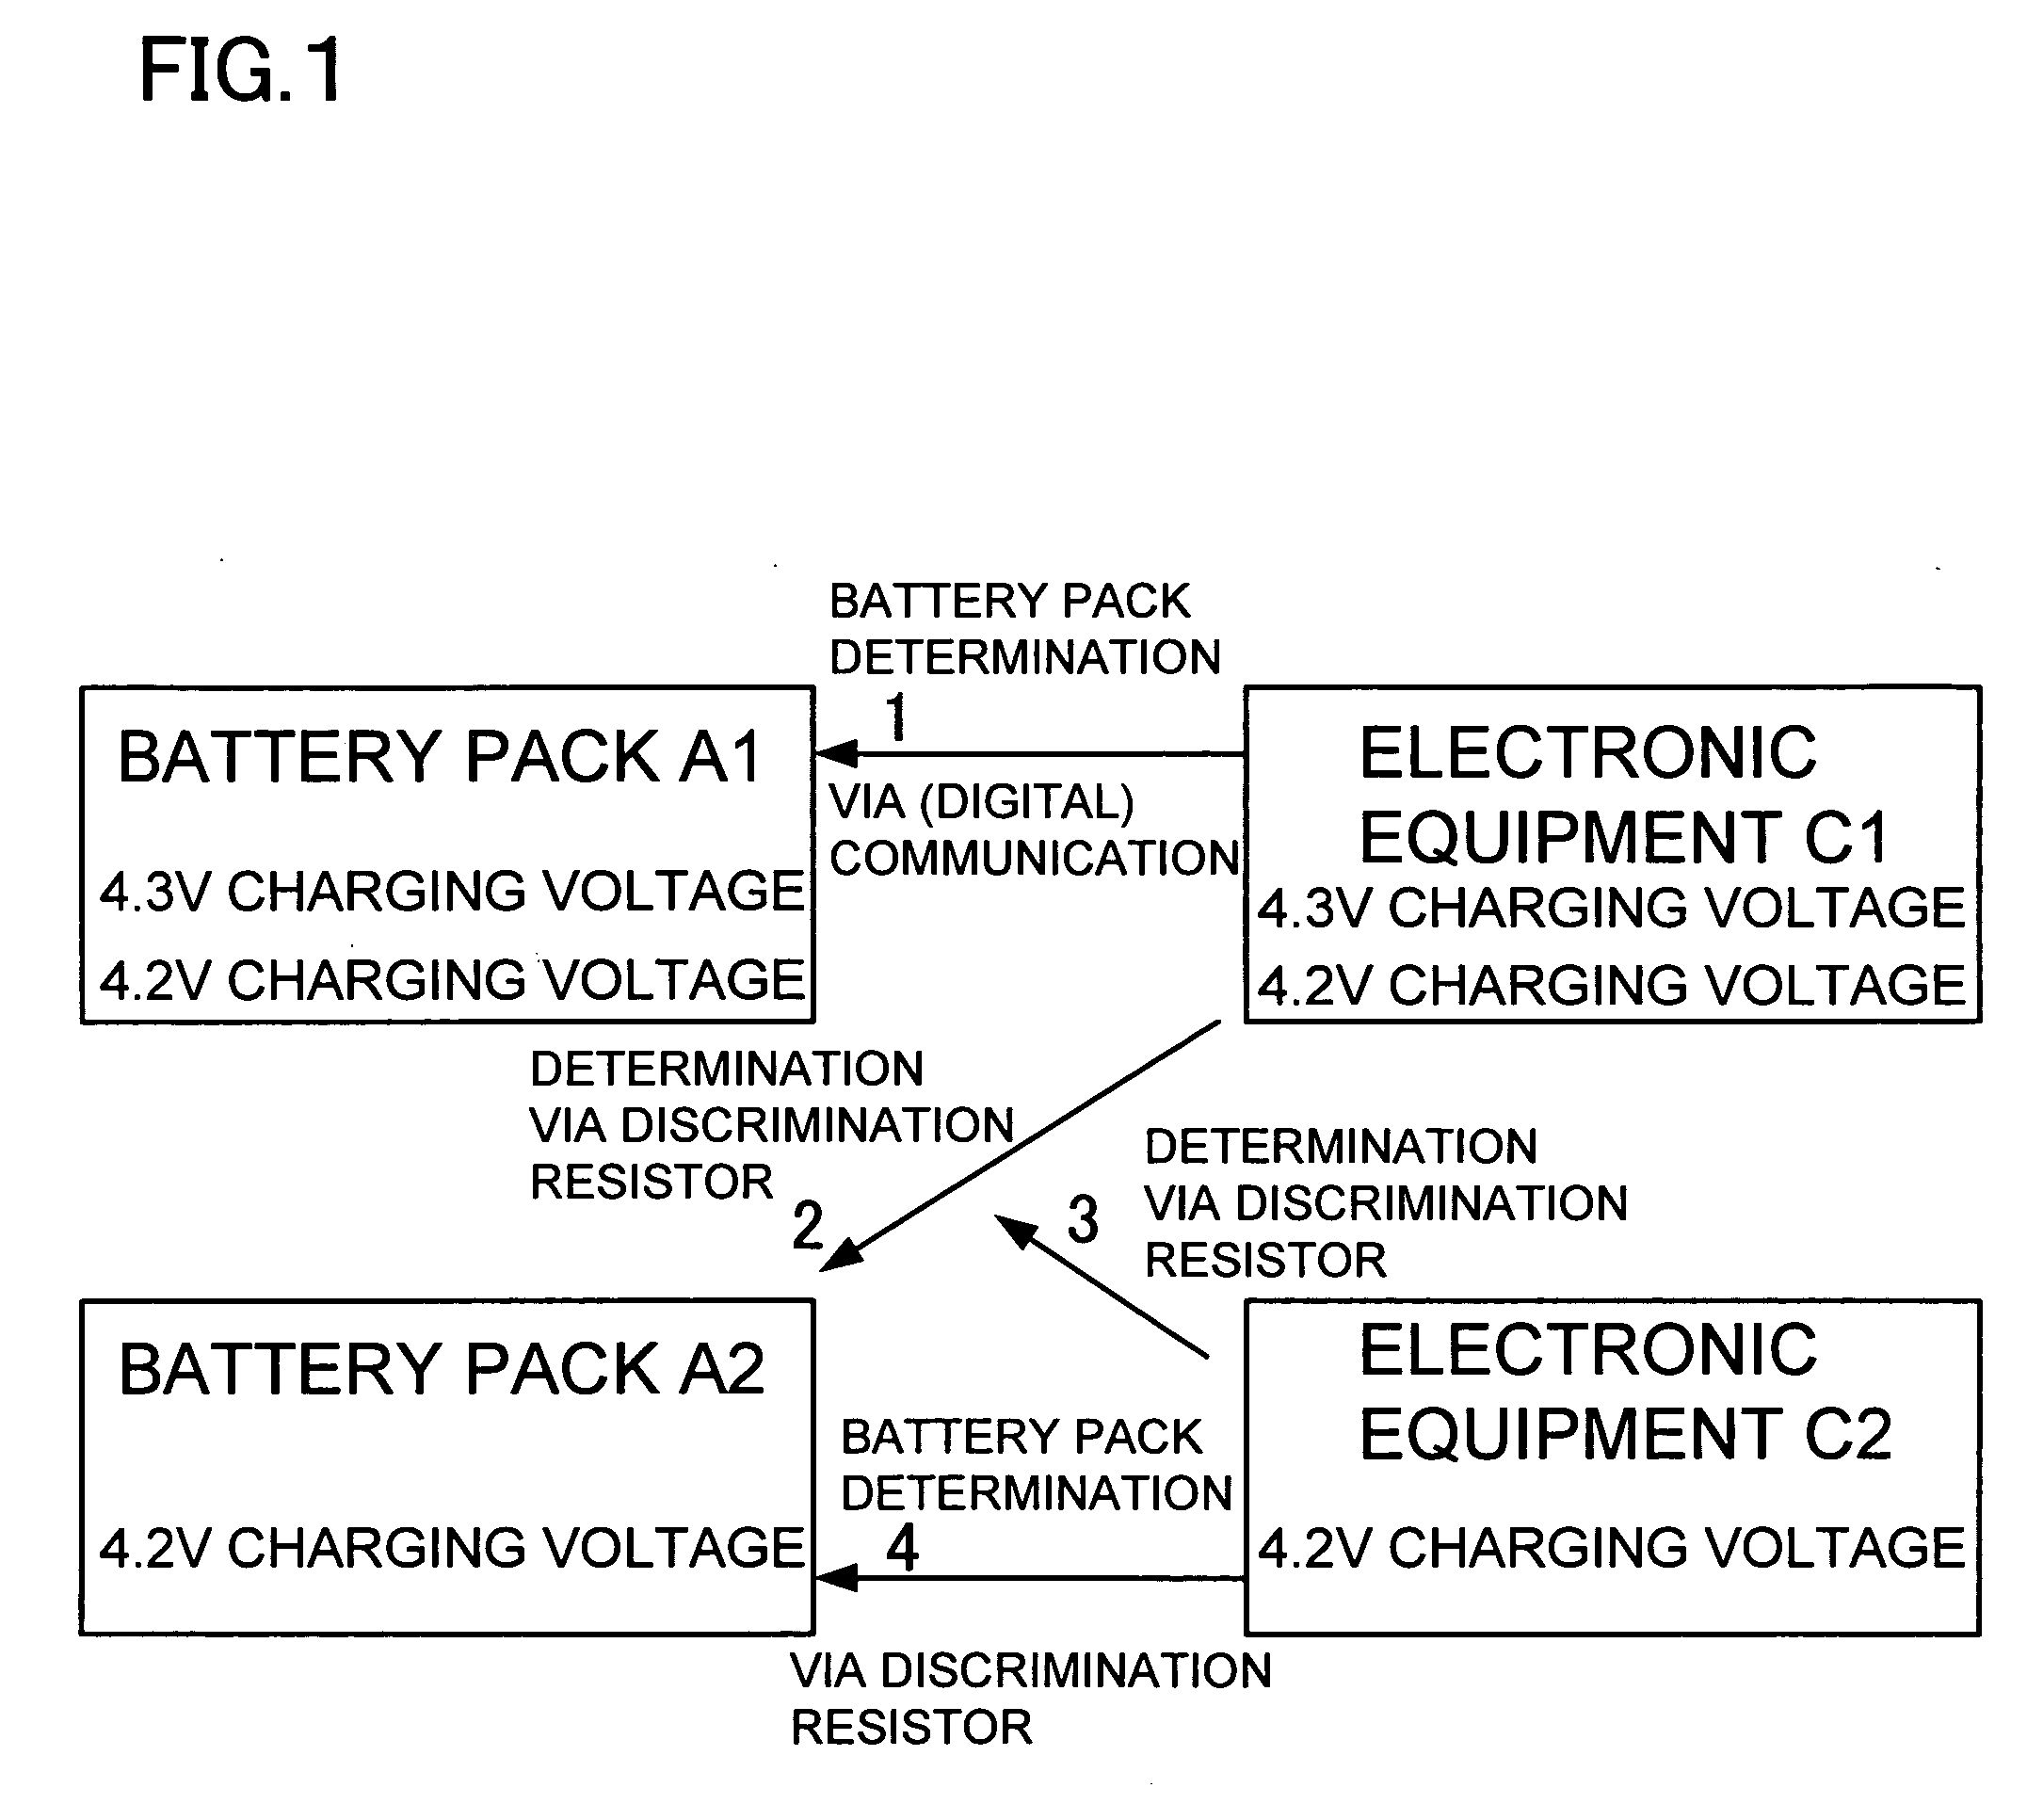 Battery pack and electronic equipment